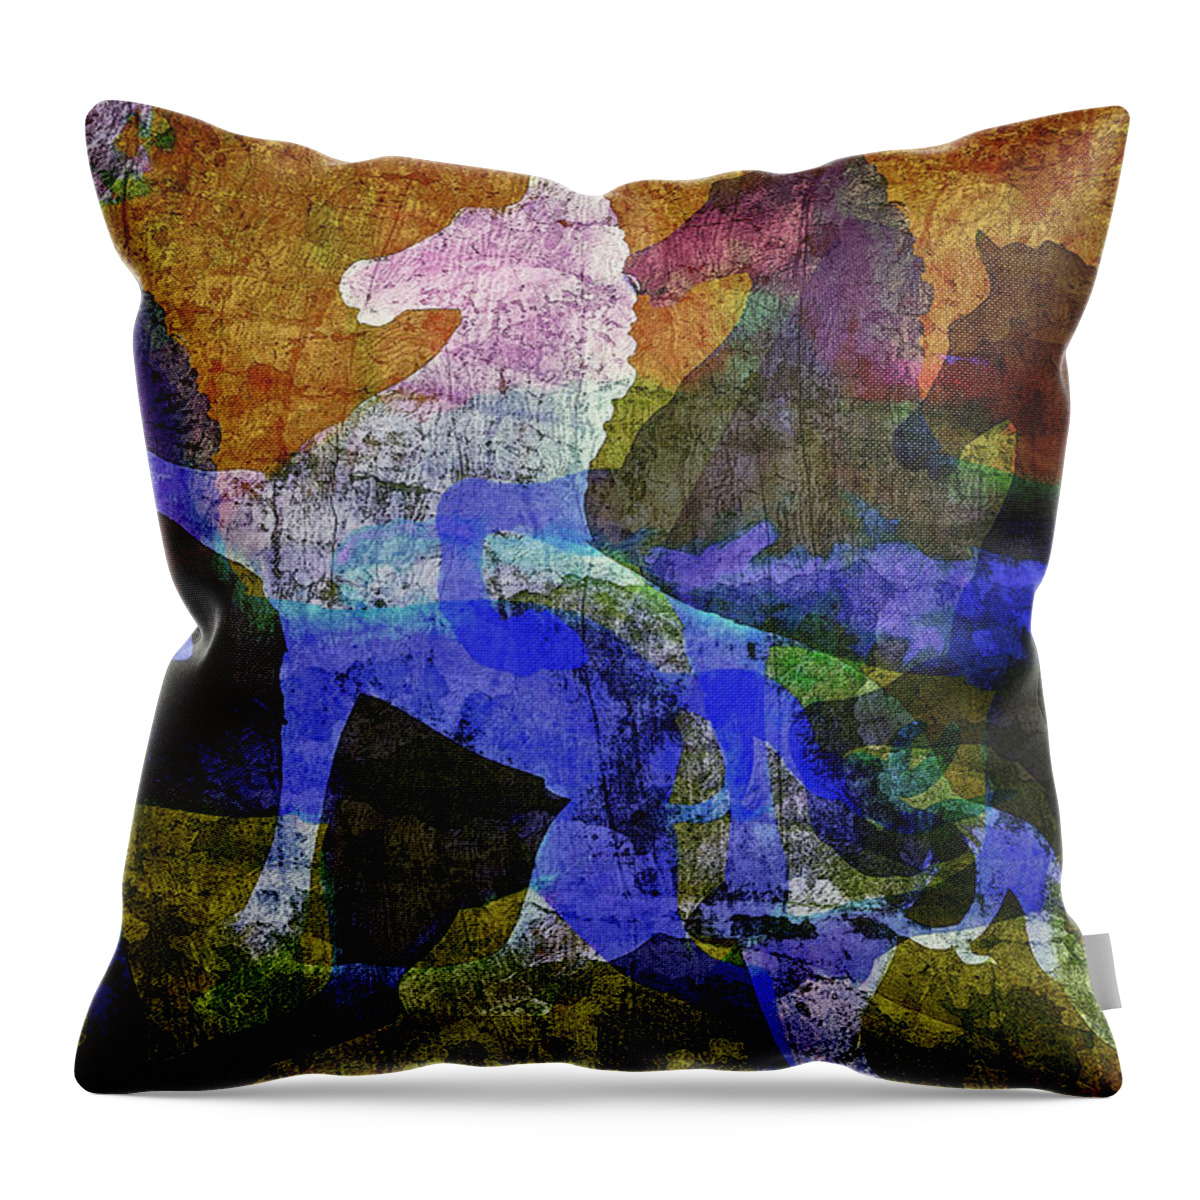 Horses Throw Pillow featuring the painting Wild Horses by Sandra Selle Rodriguez